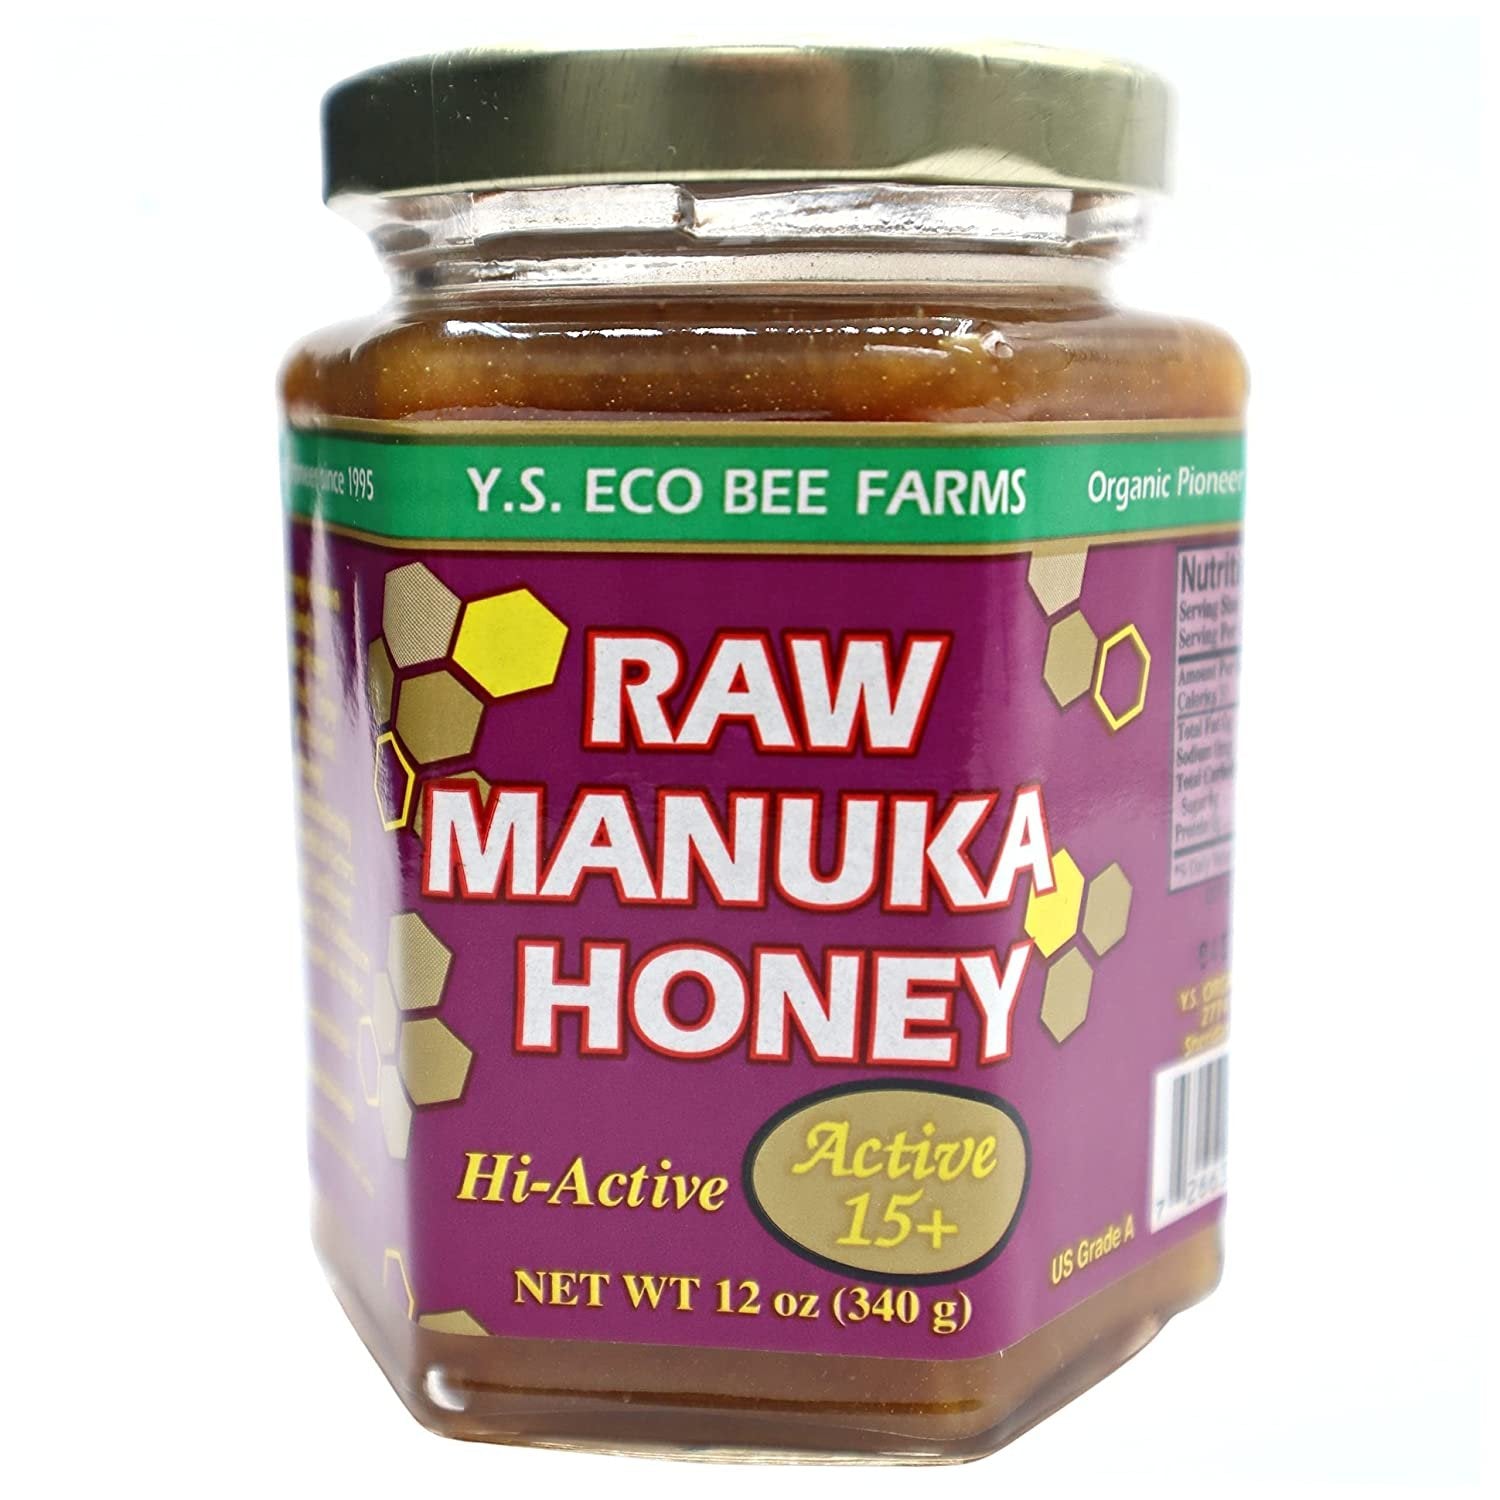 Y.S. Eco Bee Farms, 100% Certified Raw Manuka Honey, Hi-Active, Active 15plus, Unpasteurized, Unfiltered, Rare, Exotic, Raw, Kosher, Gluten Free, "The Wonder Honey Of The Tea Tree", 12 Oz -2 Jars